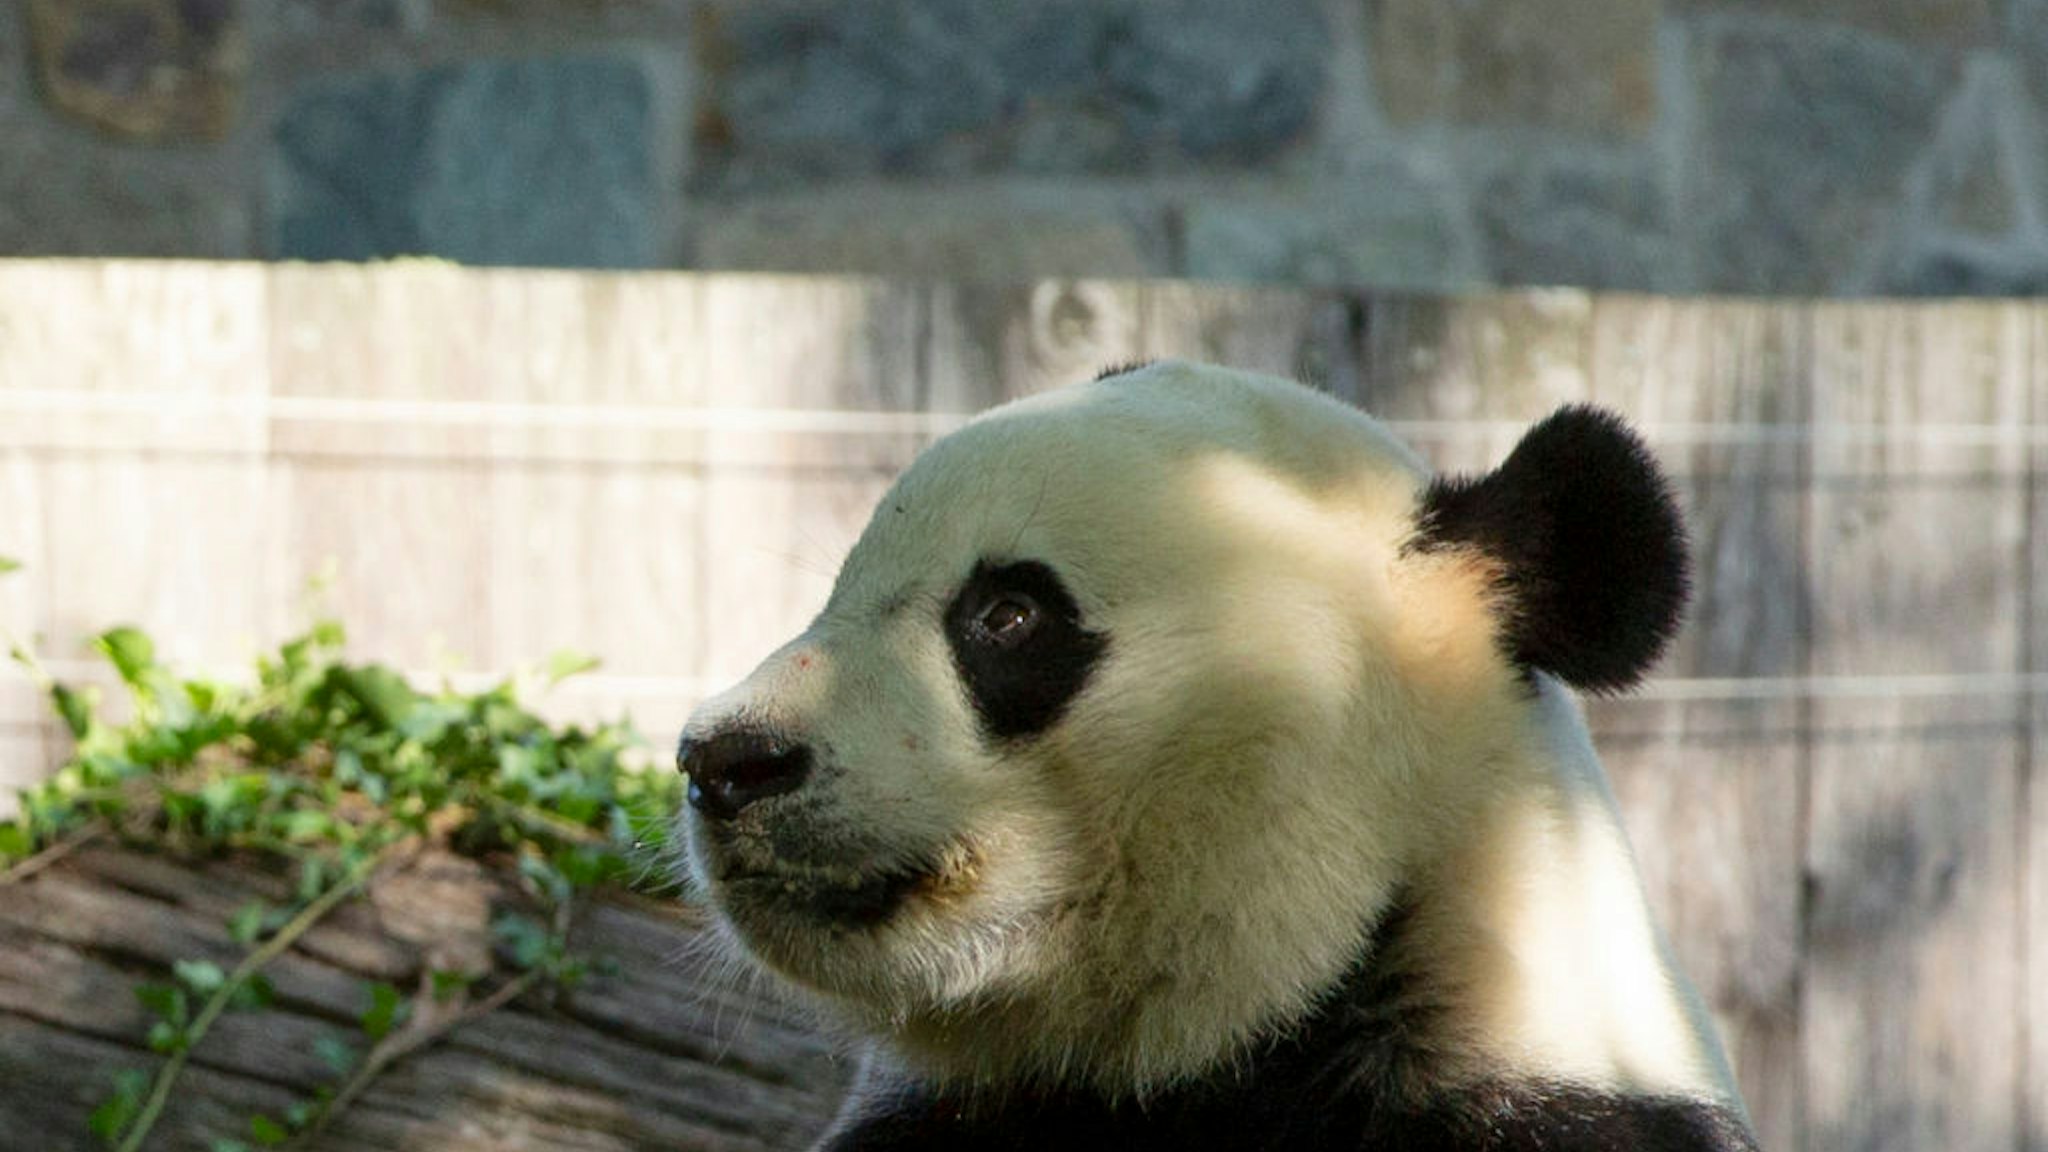 Giant panda Bei Bei eats his frozen 4th birthday cake at the Smithsonian National Zoo in Washington, DC, on August 22, 2019.